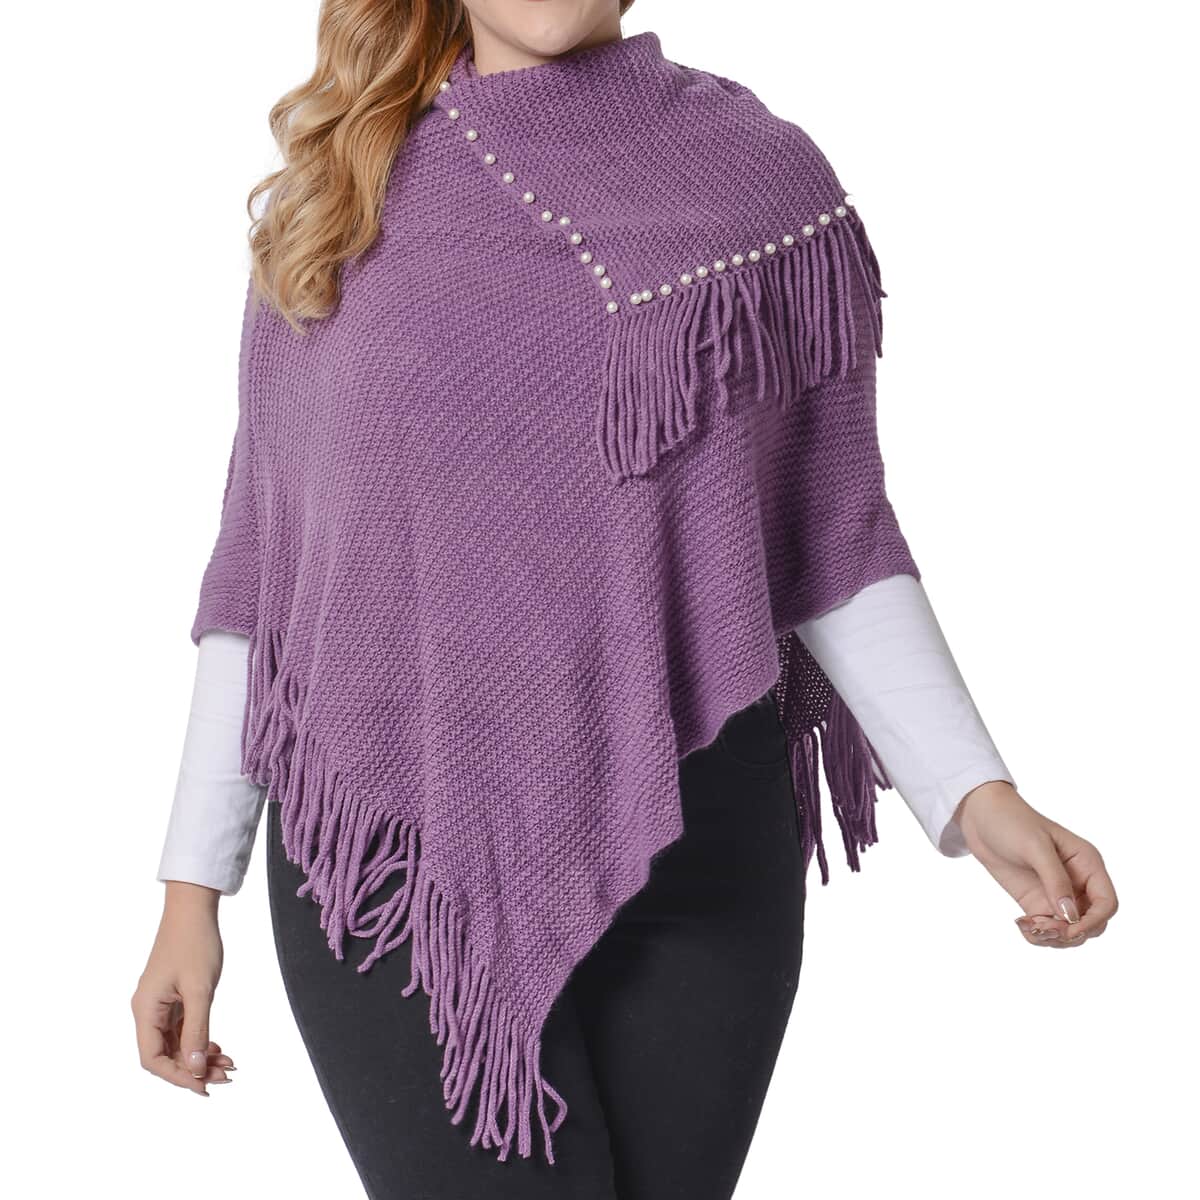 Value Buy Black Cape Neck V-Shape Poncho with Pearls and Fringe Accent (One Size Fits Most, 100% Acrylic) image number 0